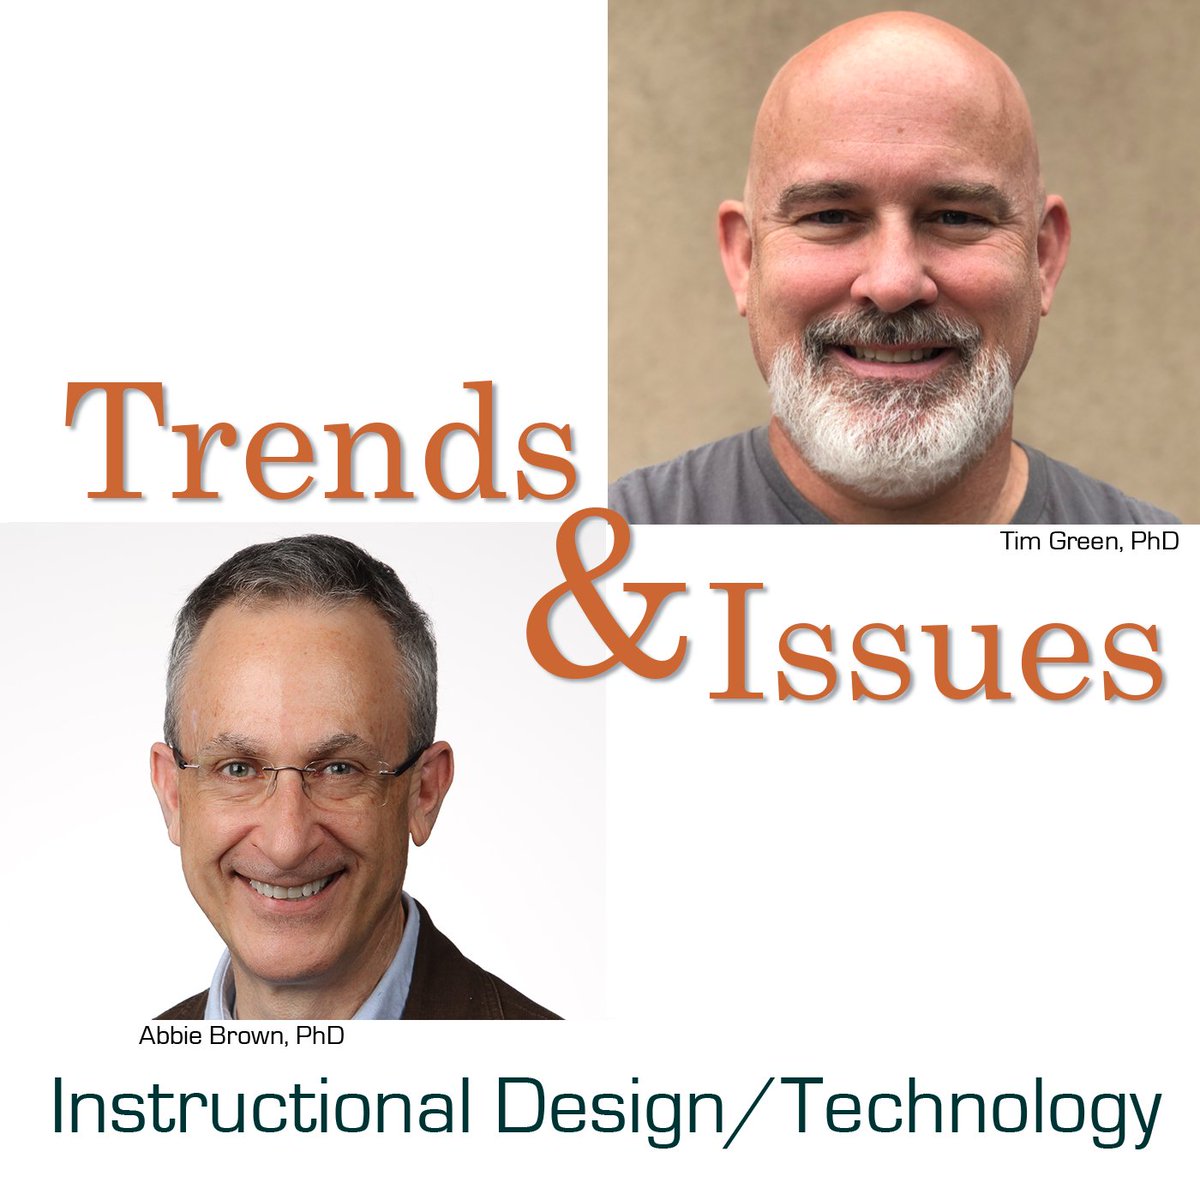 Podcast Episode #215: Your 13-minute audio update of instructional design/technology news from the past two weeks - @theedtechdoctor #edtech bit.ly/3dlImpO